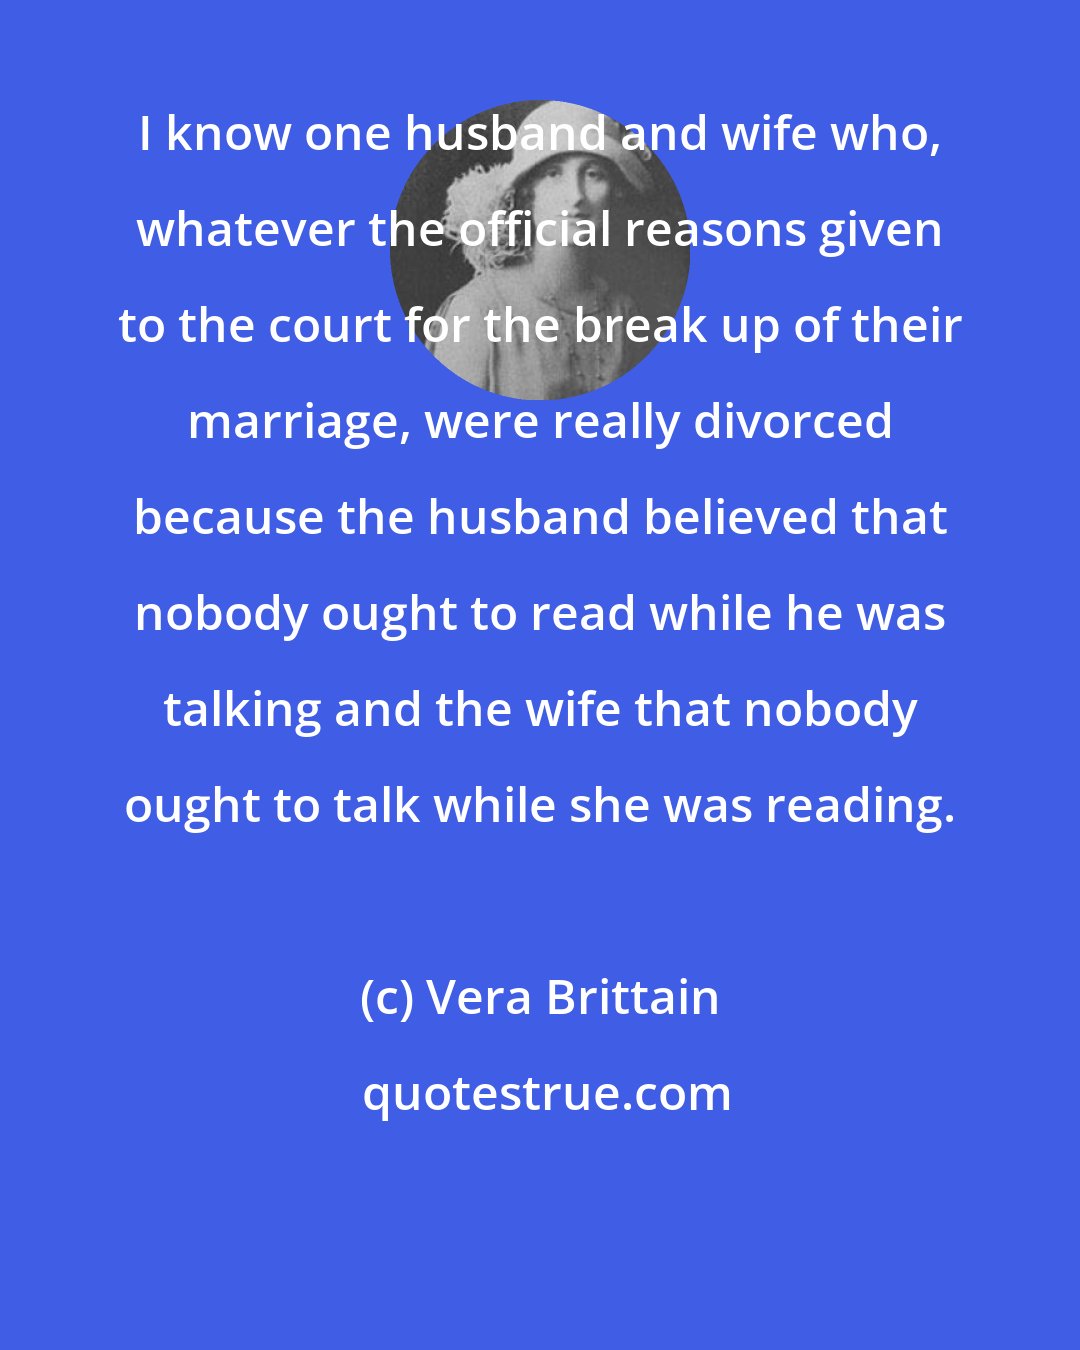 Vera Brittain: I know one husband and wife who, whatever the official reasons given to the court for the break up of their marriage, were really divorced because the husband believed that nobody ought to read while he was talking and the wife that nobody ought to talk while she was reading.